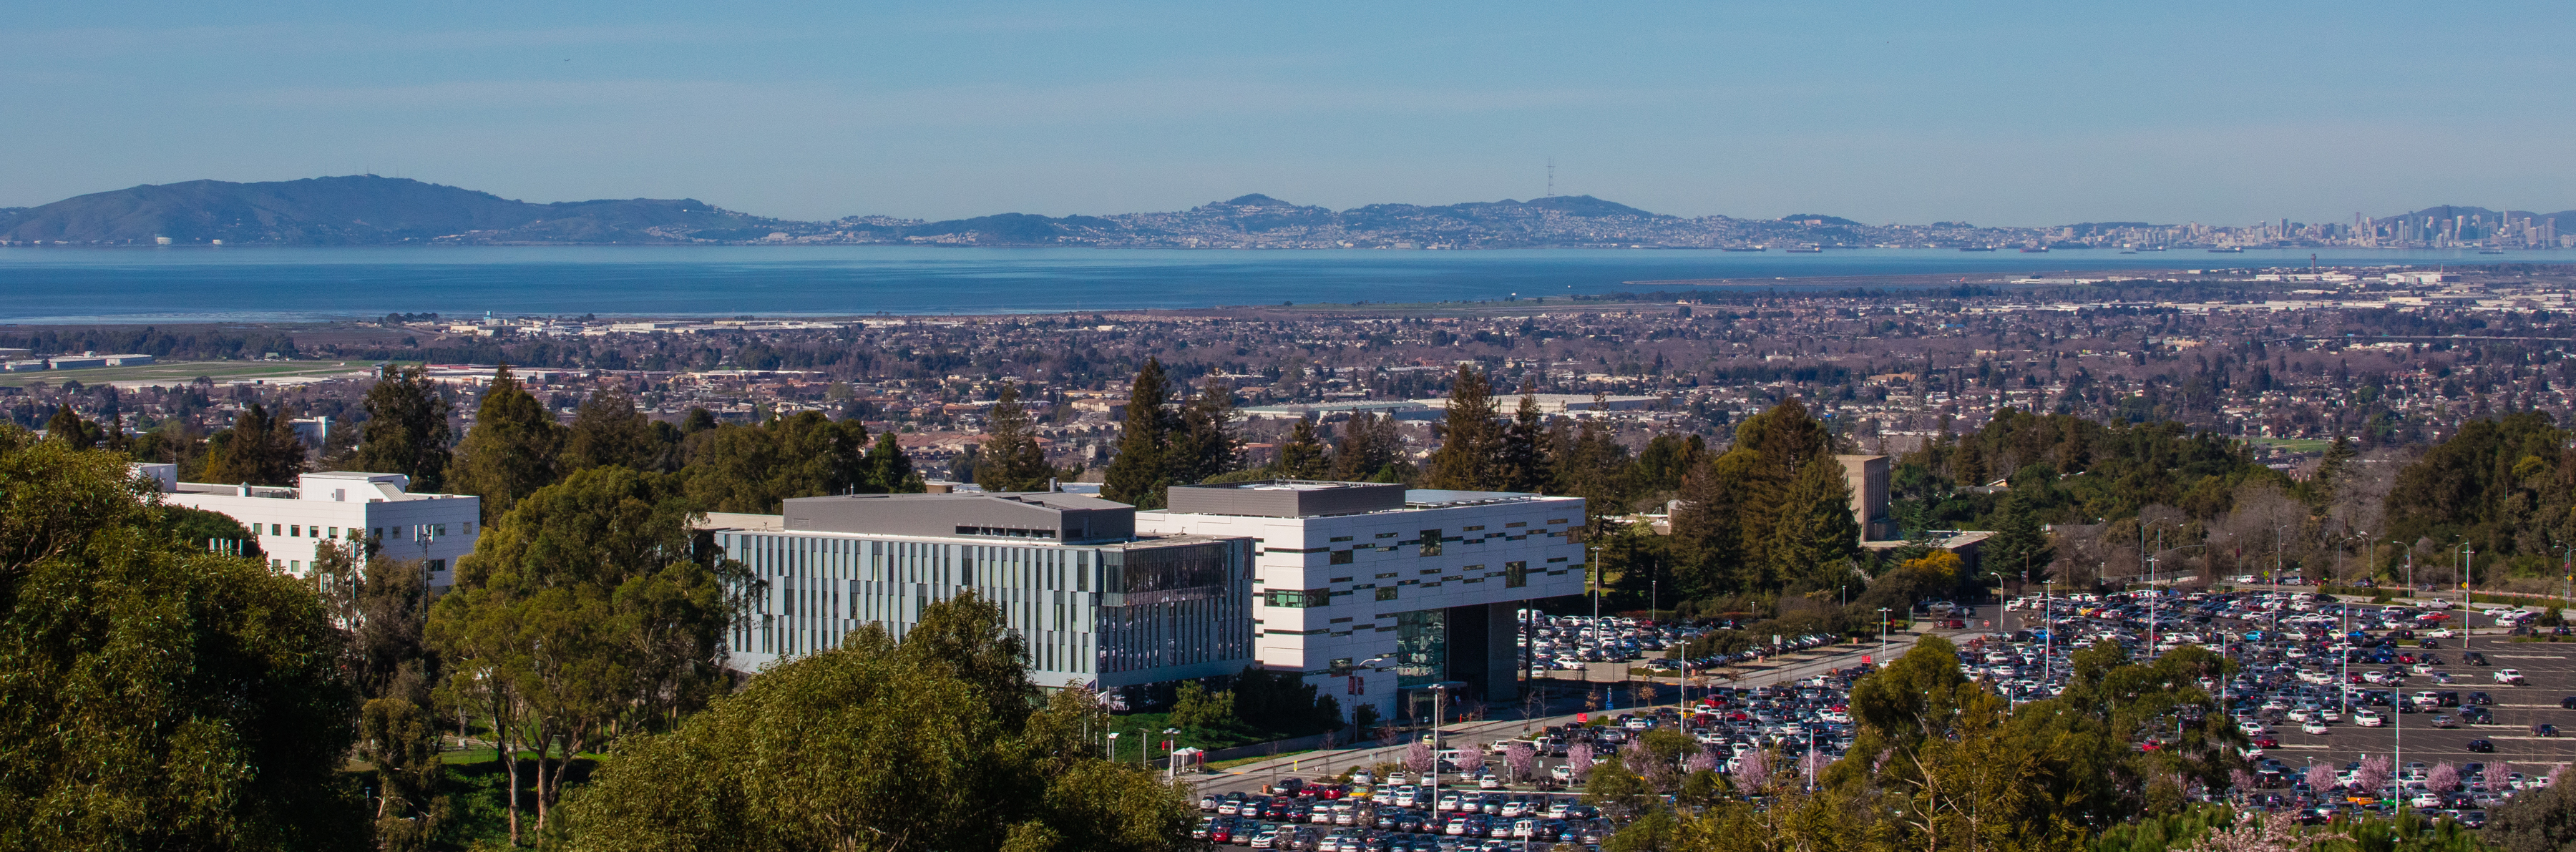 CSUEB Student & Faculty Support Building